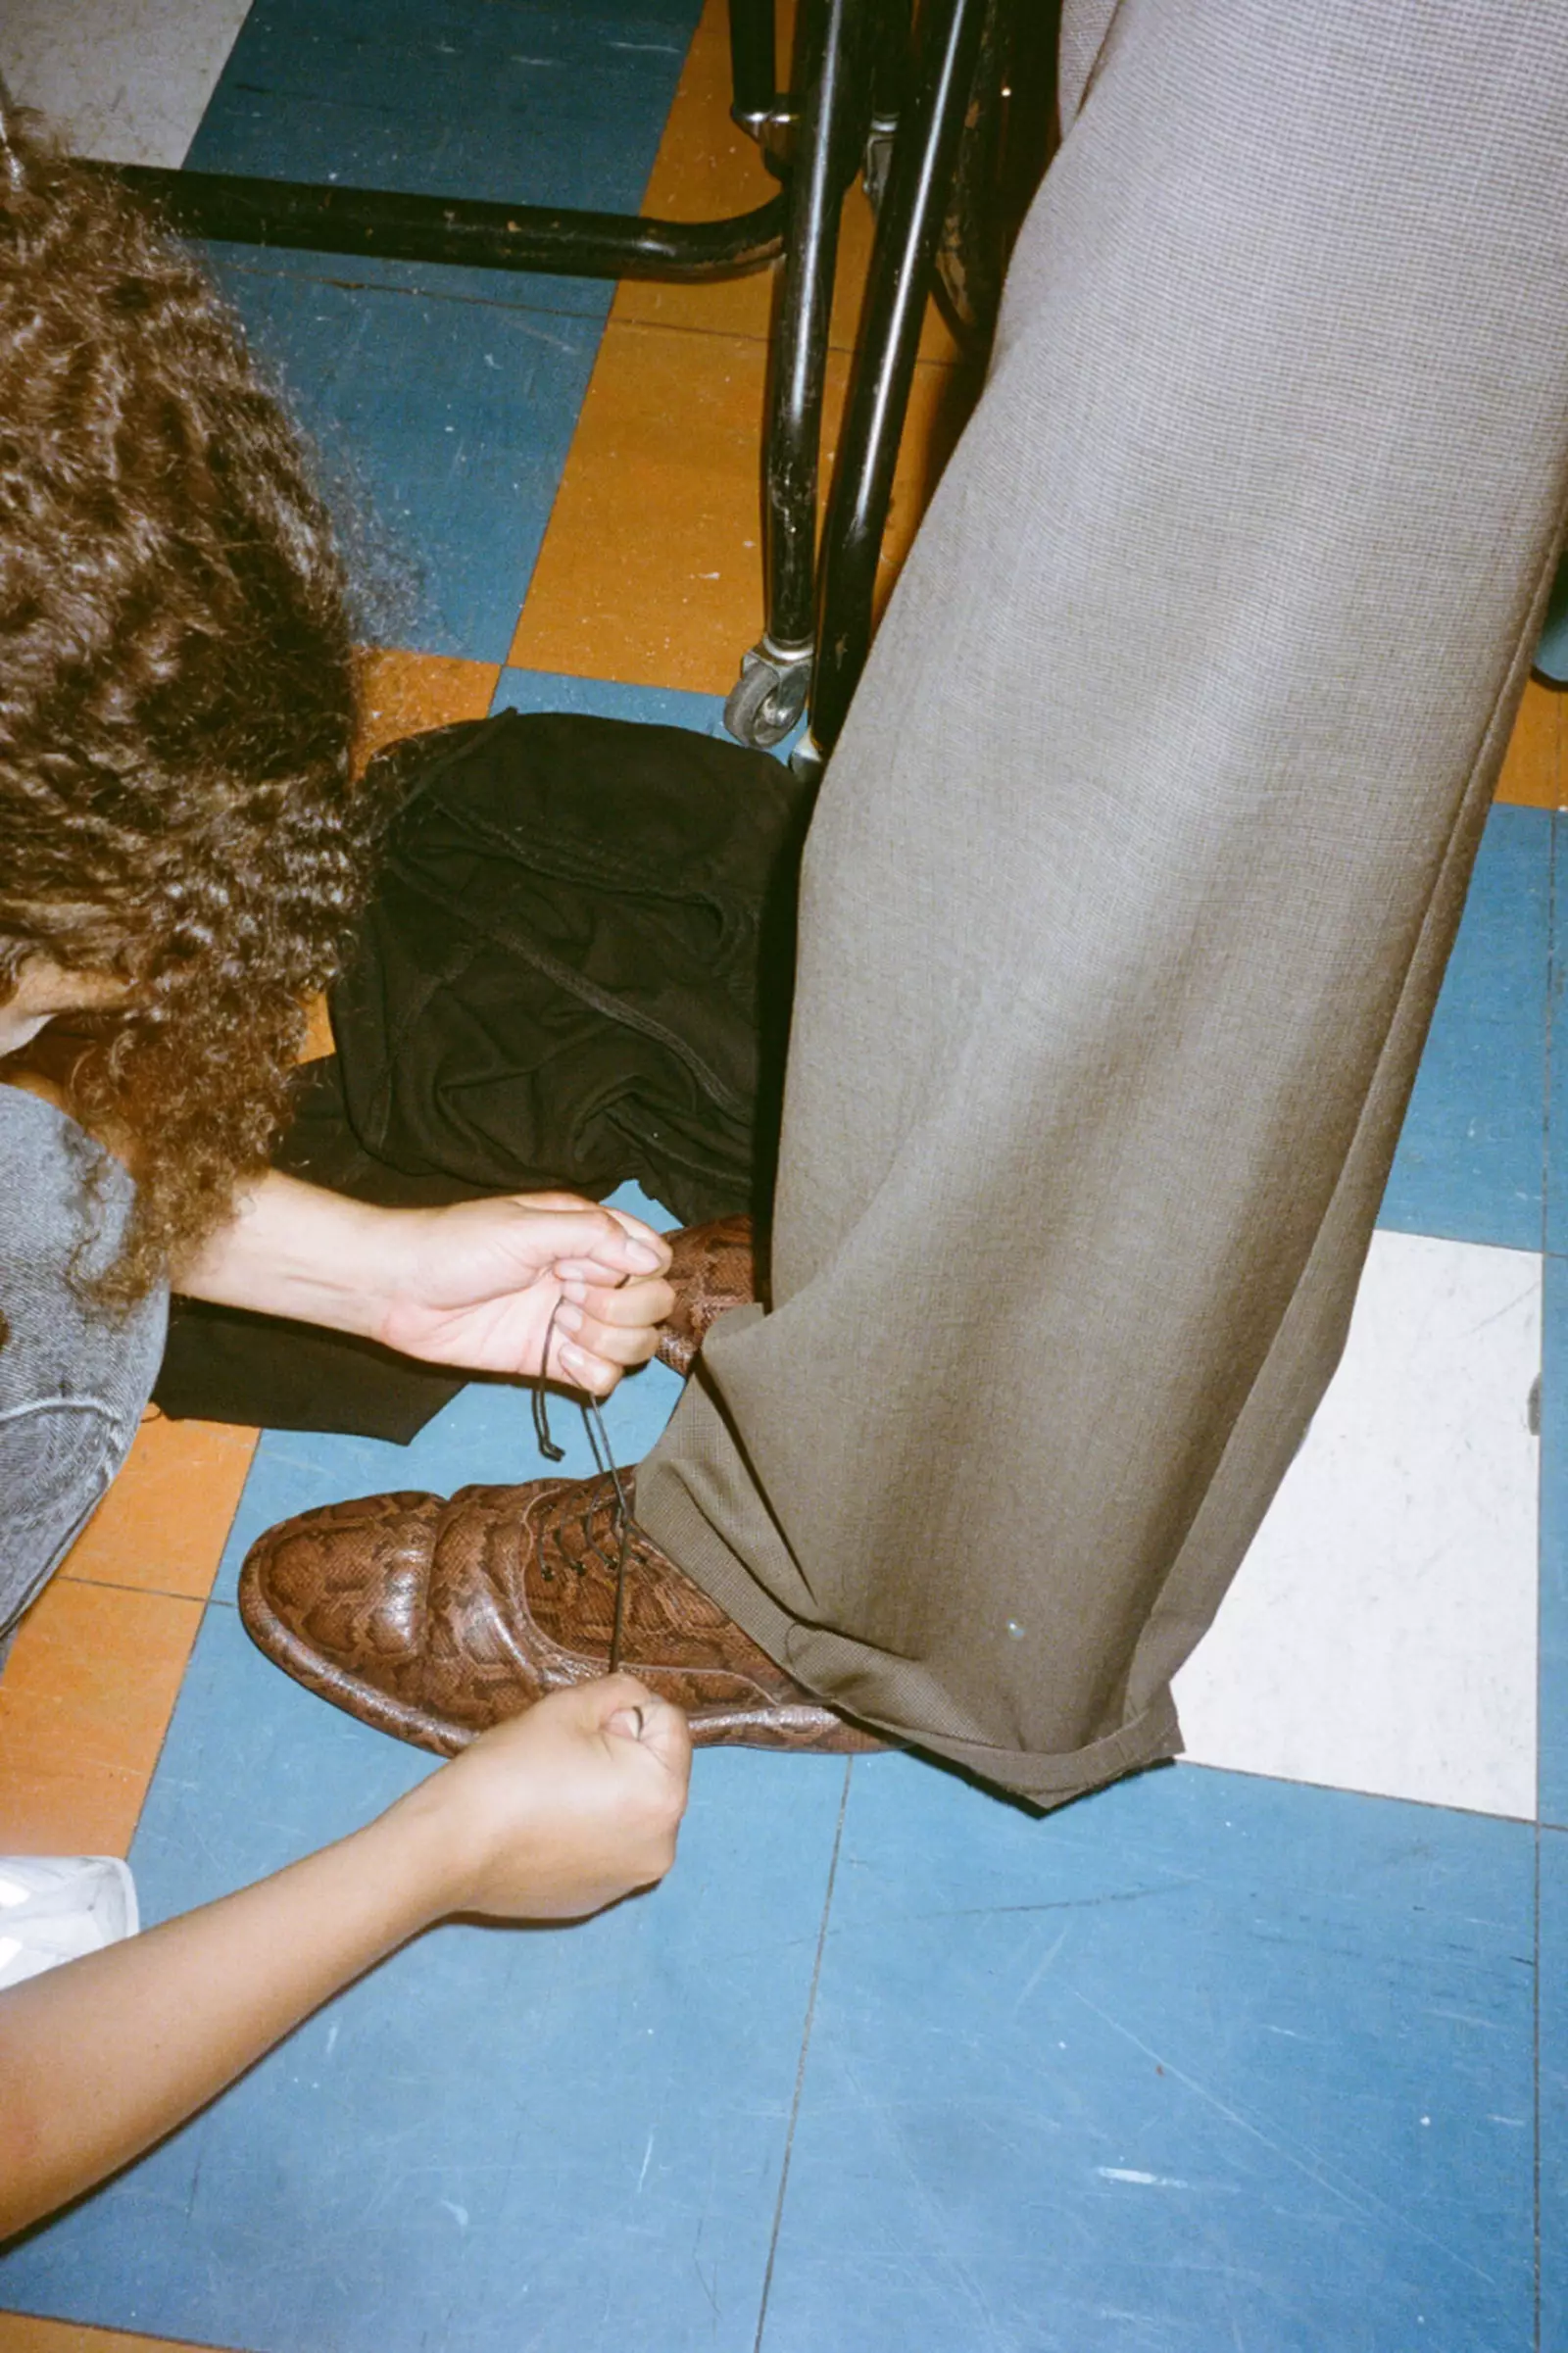 Martine Rose Is Having a Moment, Working with Stüssy, Clarks and